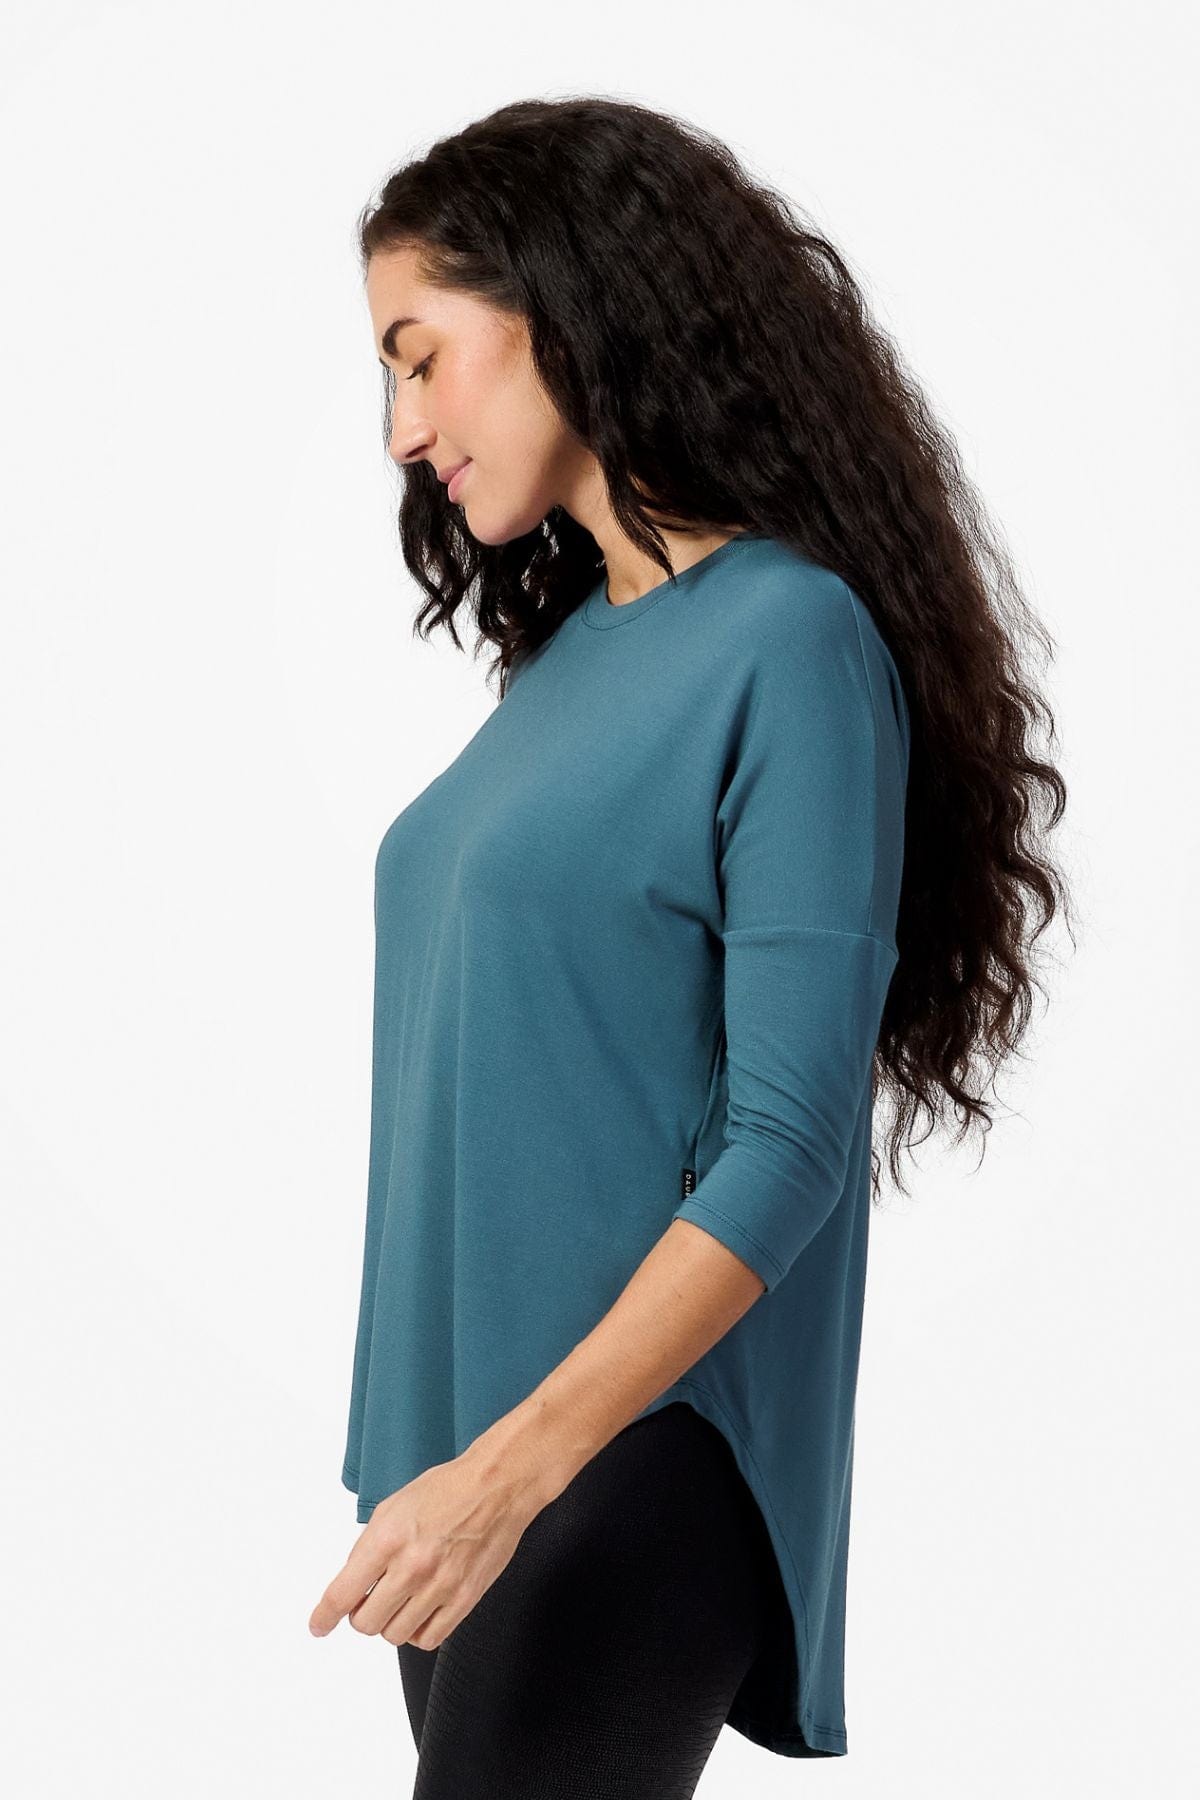 Side of a woman wearing a Teal 3/4 length sleeve shirt